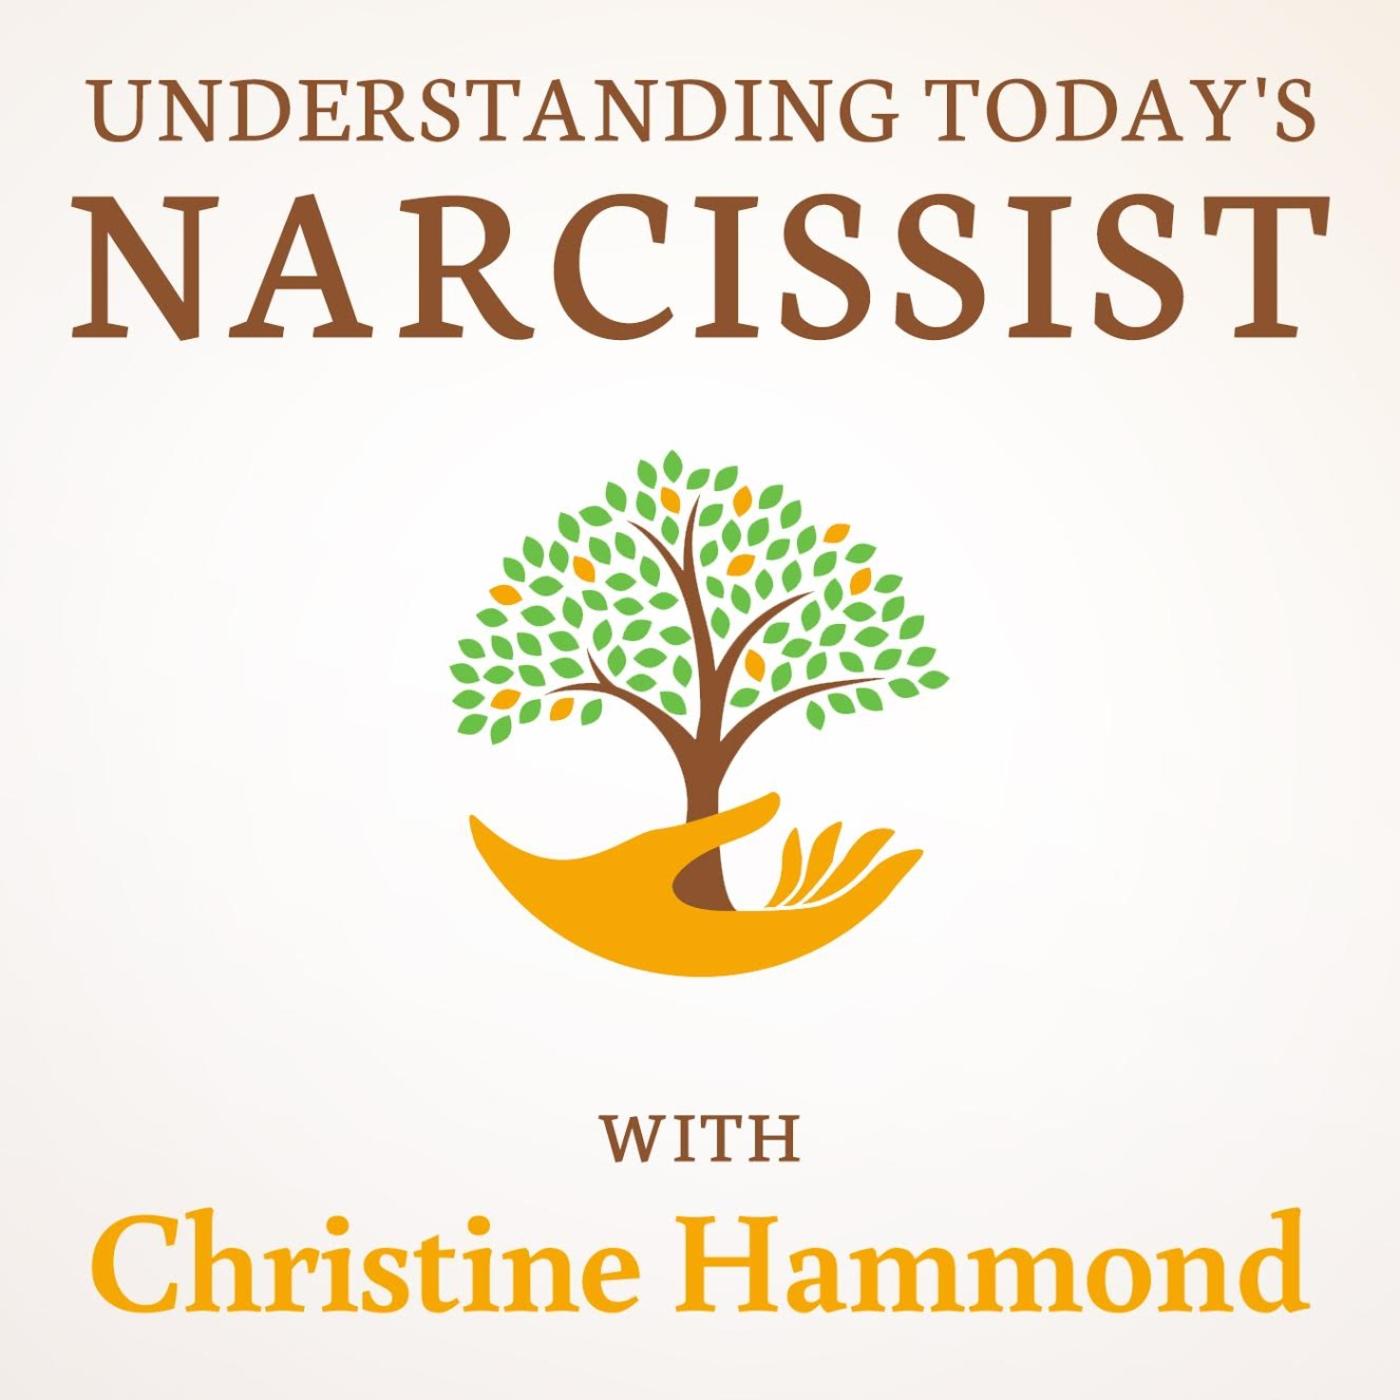 Part 3 of an interview with Dr. Nadine Macaluso, LMFT